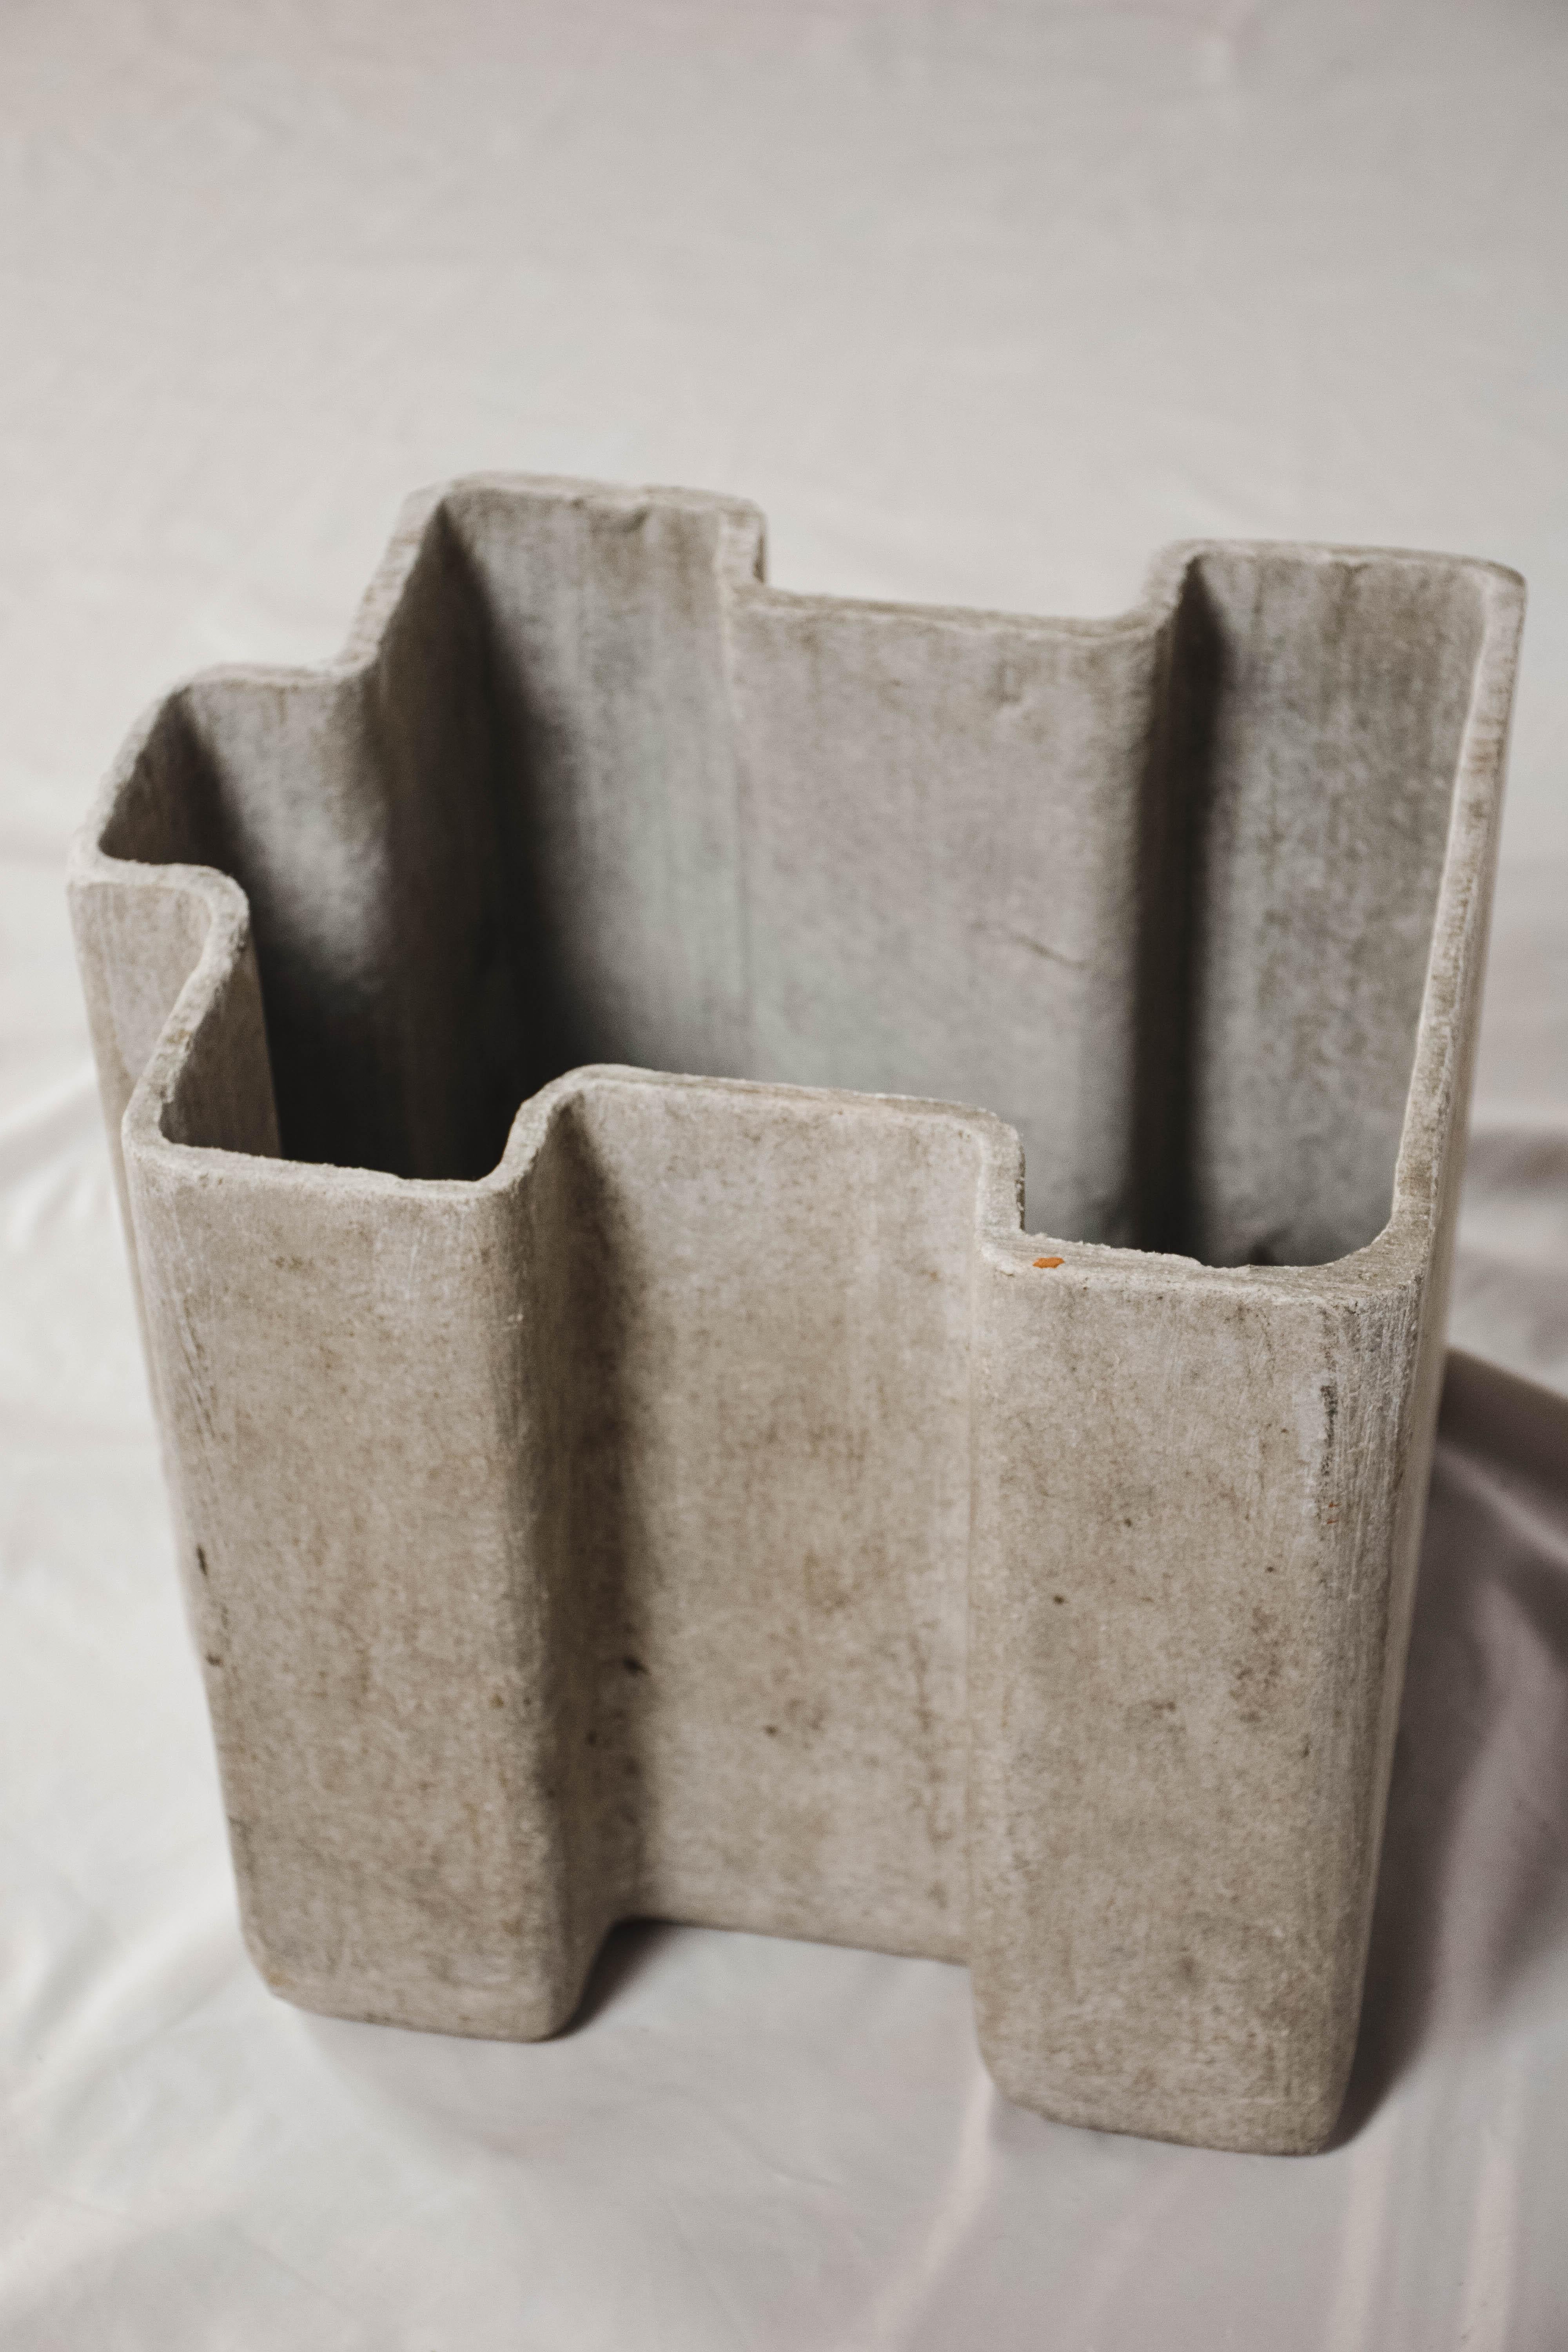 Found in France and created in the mid-20th century, this rare Willy Guhl puzzle piece planter is perfect for indoor or outdoor use. This sculptural piece is the design of Swiss architect Willy Guhl. Made of cement, this piece has a distinct style